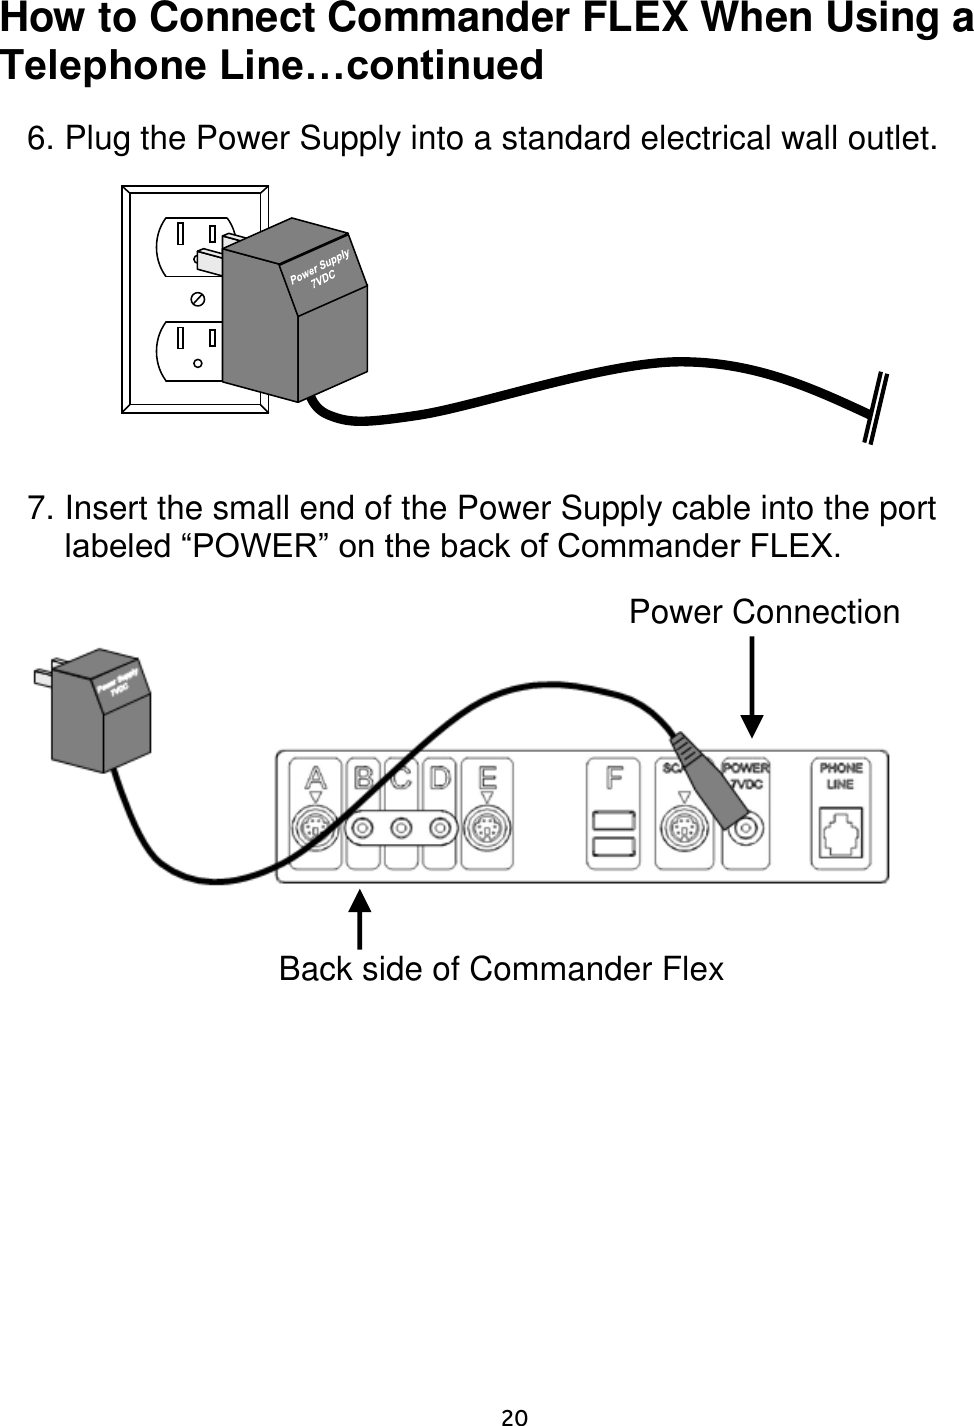     20  How to Connect Commander FLEX When Using a Telephone Line…continued   6. Plug the Power Supply into a standard electrical wall outlet.              7. Insert the small end of the Power Supply cable into the port labeled “POWER” on the back of Commander FLEX.                    Power Connection  Back side of Commander Flex   